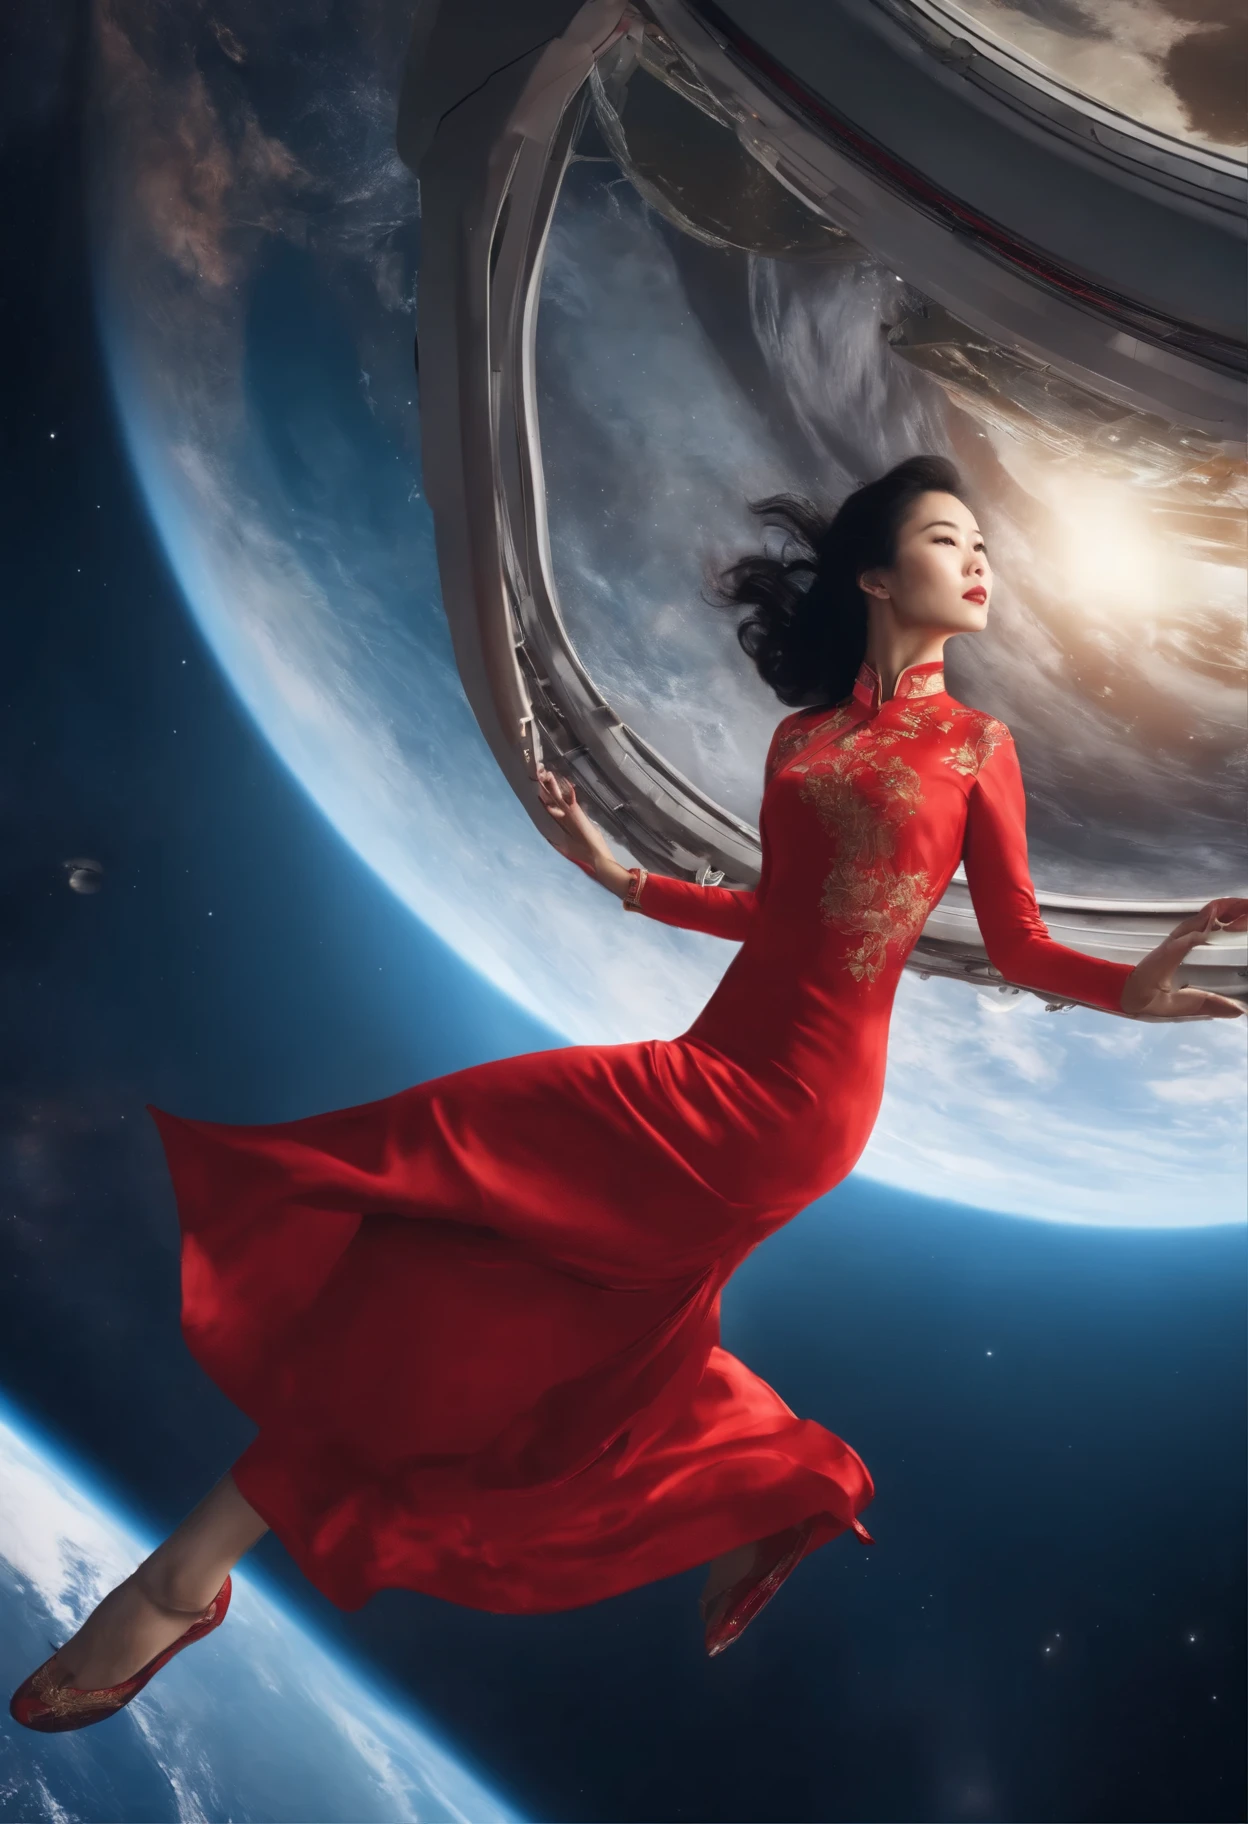 An awe-inspiring digital rendering capturing the sheer beauty of an Asian lady donned in a red cheongsam, suspended motionlessly inside the International Space Station amidst a dreamlike zero-gravity setting, showcasing Earth's majesty seen from space, accompanied by dazzling stars in the background.